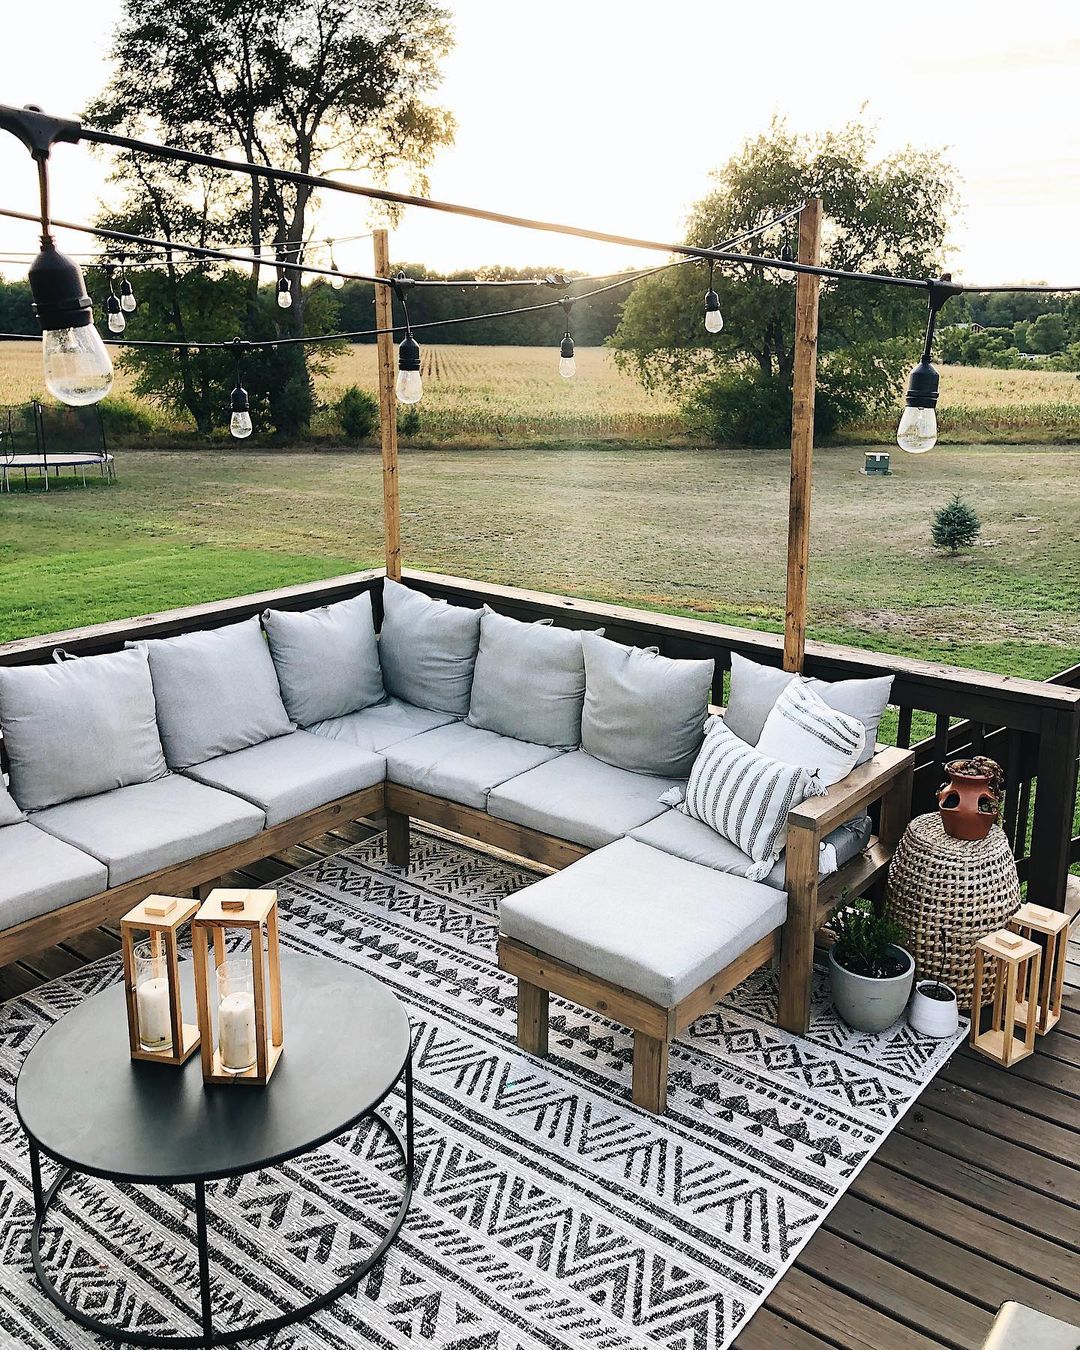 Large Outdoor Sectional on a Deck. Photo by Instagram user @west_and_co